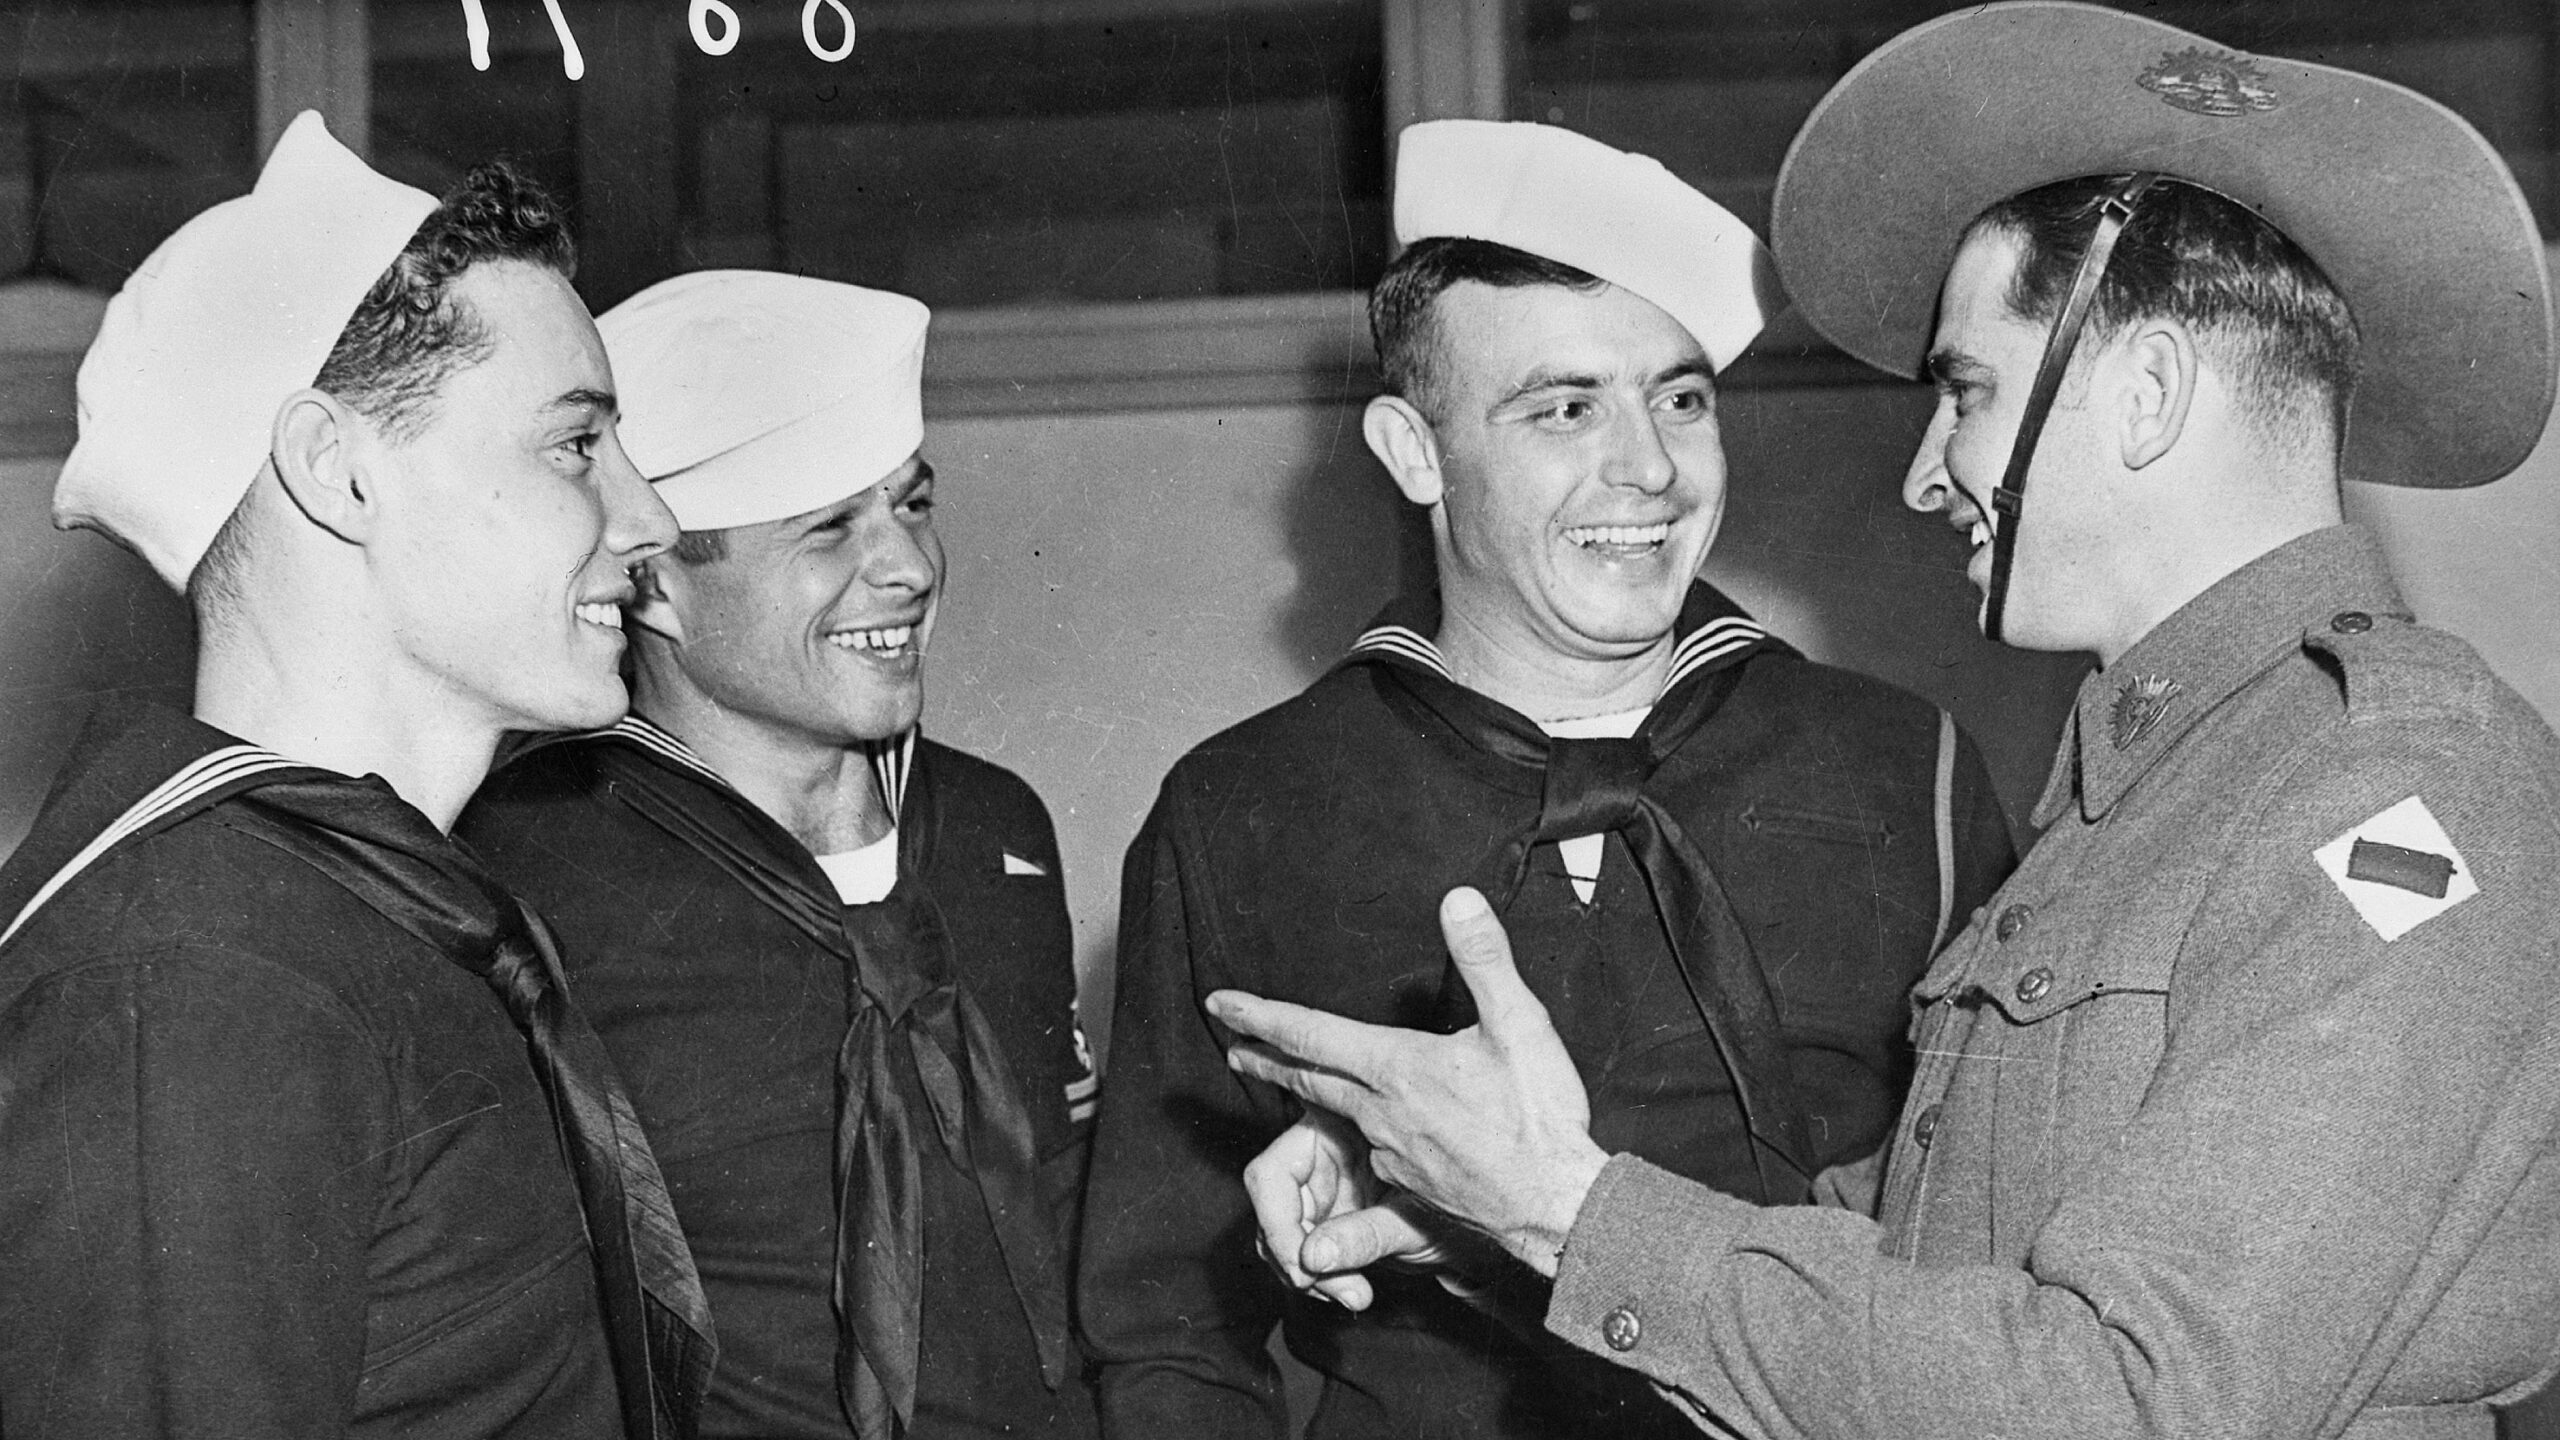 Australian Corporal G.E. Burns welcomes a trio of American sailors to Brisbane in a photo that has obviously been staged.